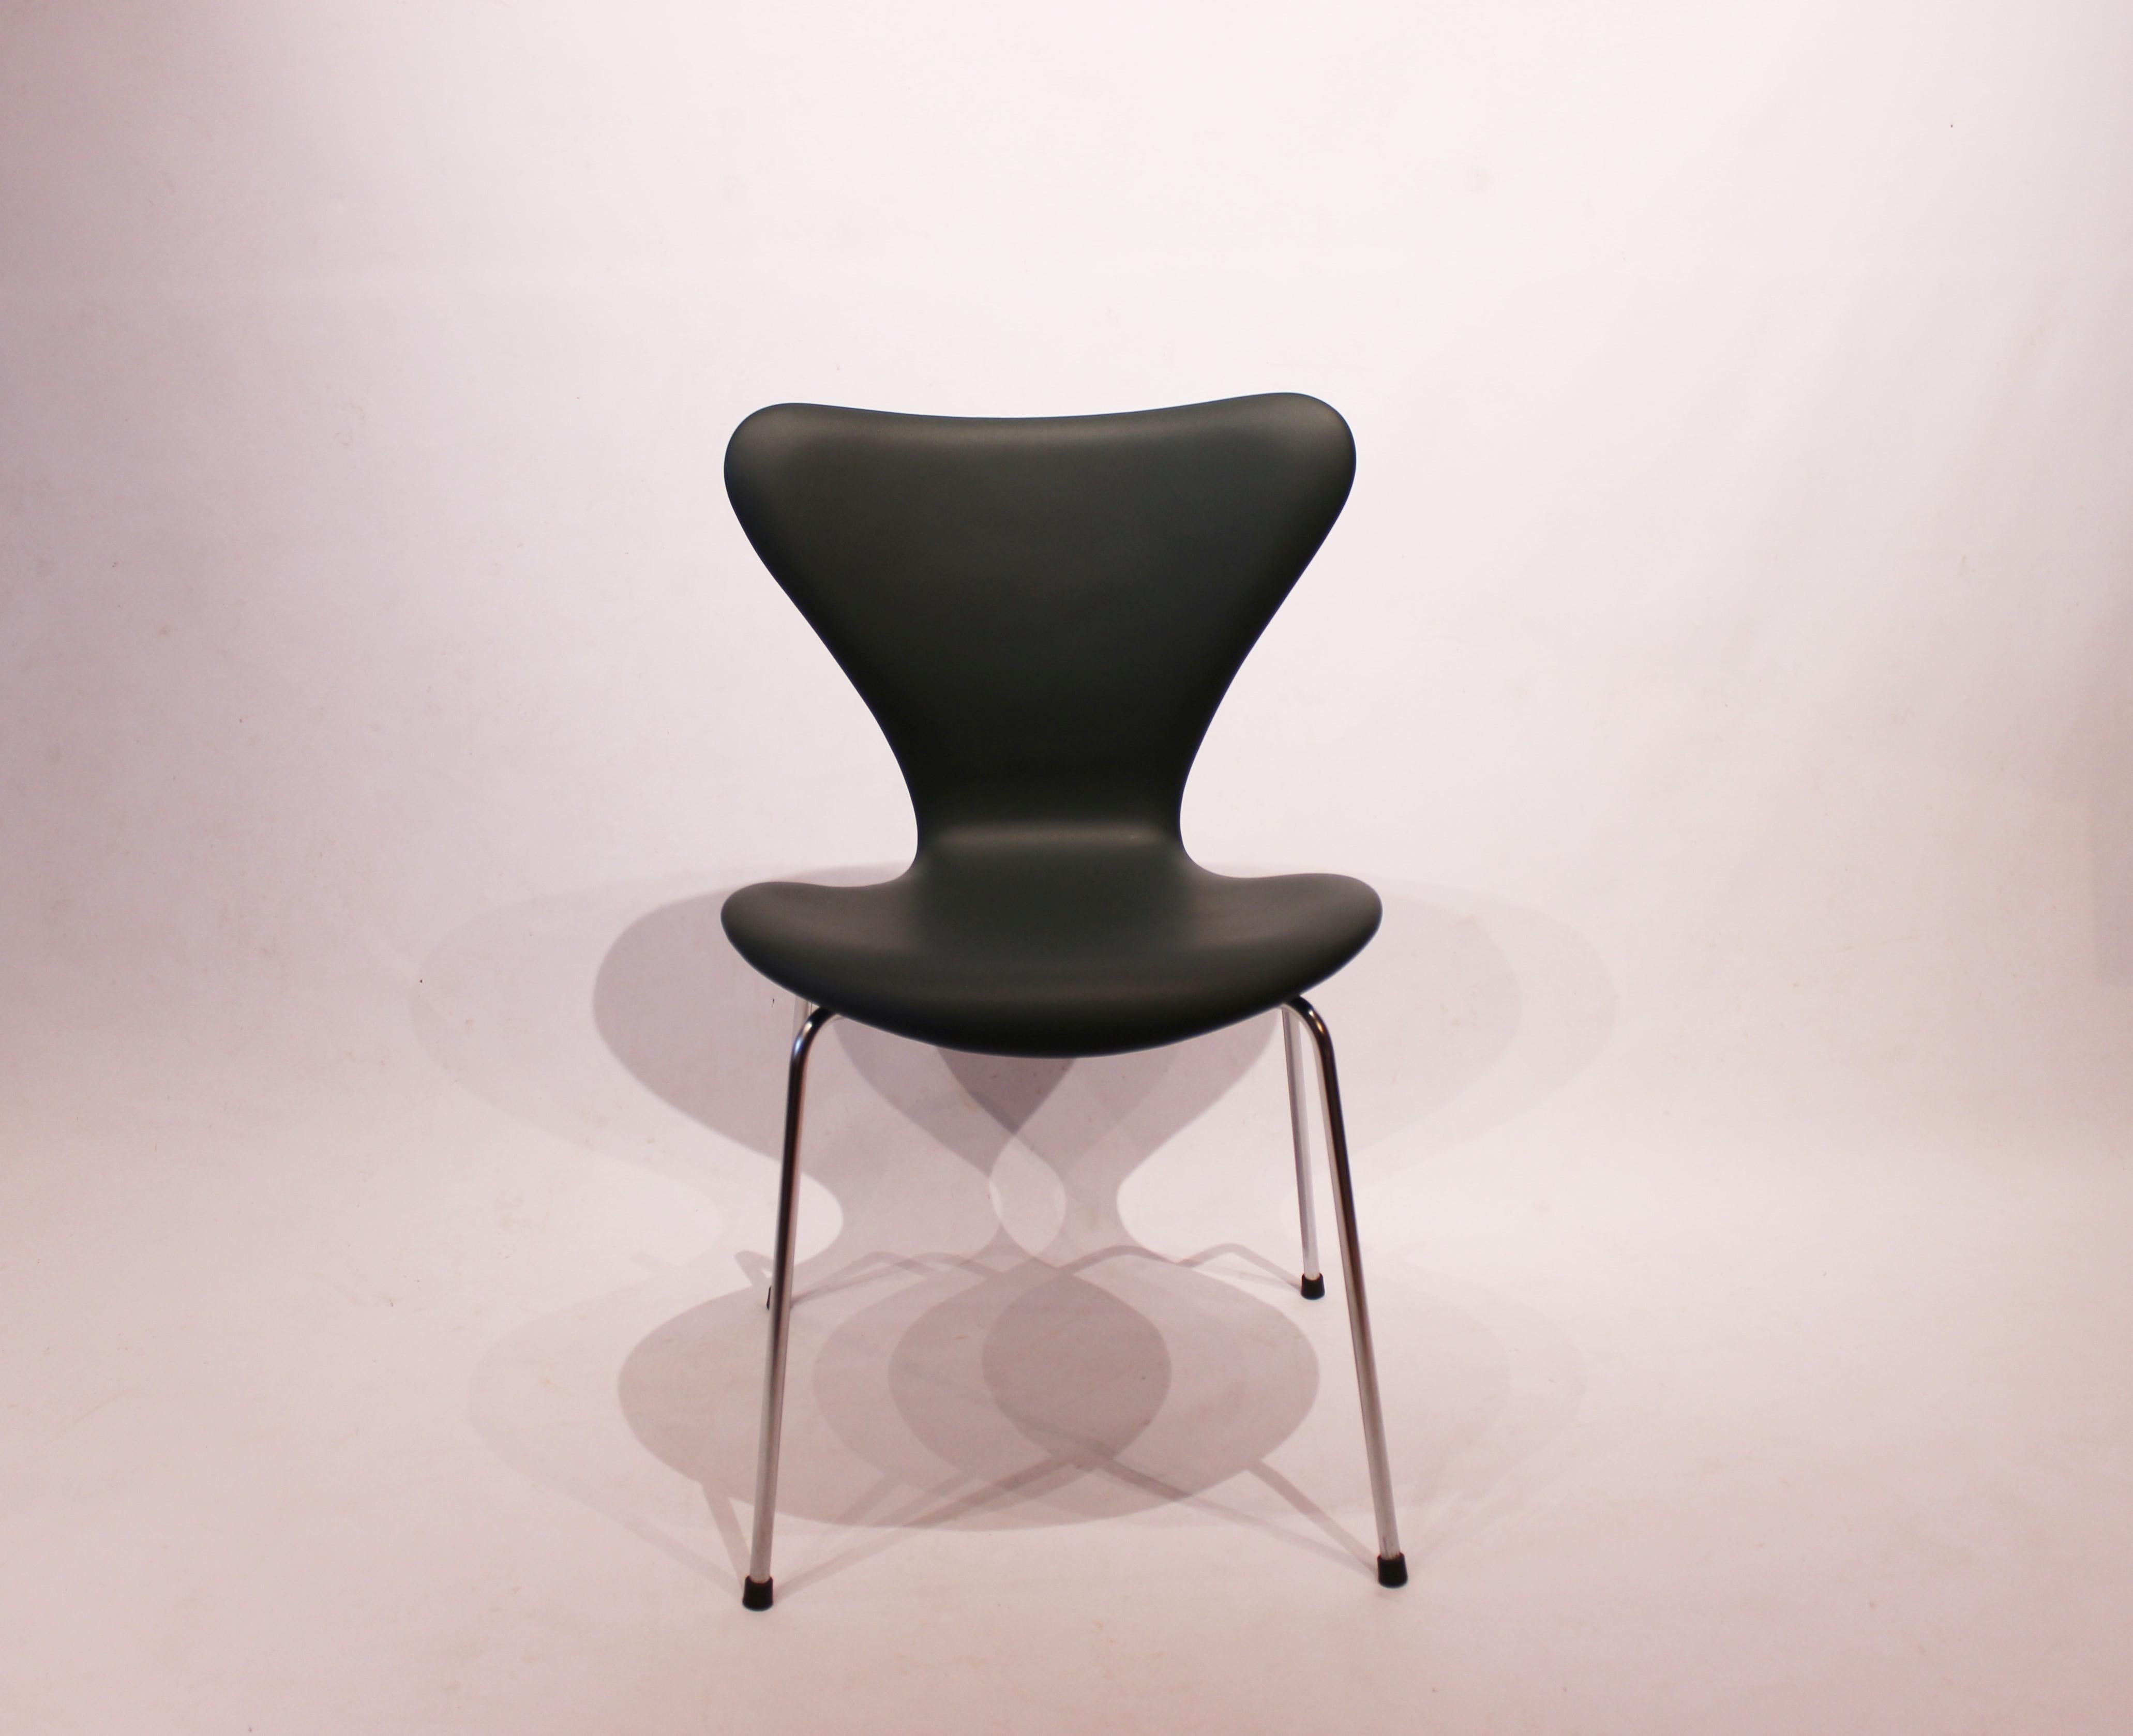 Exquisite Set of 6 Model 3107 Chairs by Arne Jacobsen, meticulously crafted in 1967 by Fritz Hansen, now elegantly refurbished in luxurious black Classic leather upholstery.

Arne Jacobsen's iconic design, the model 3107 chair, stands as a testament